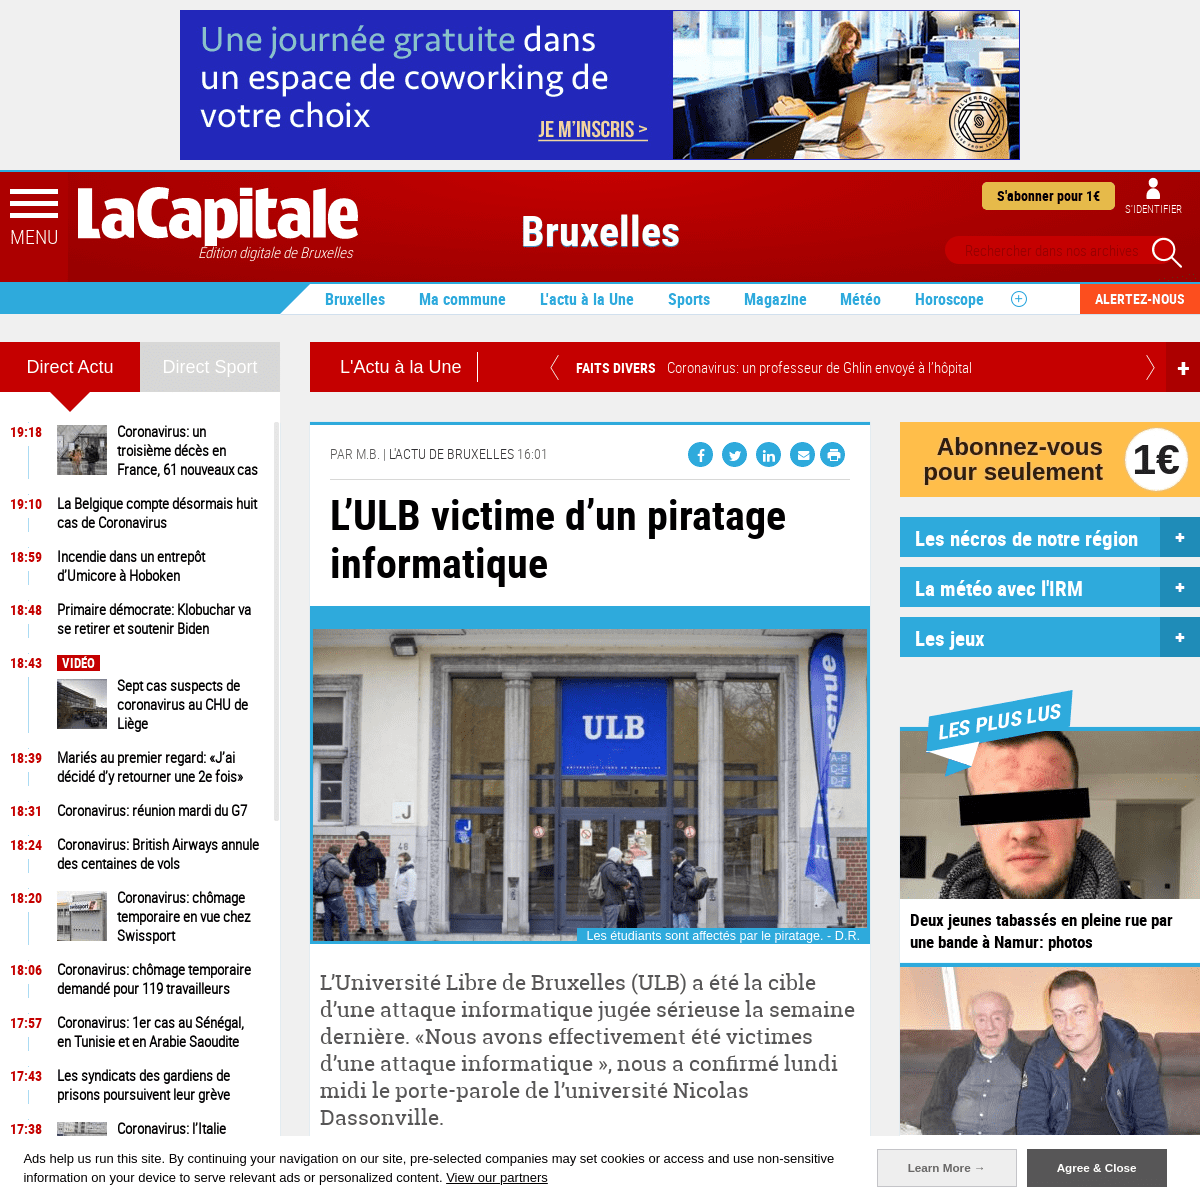 A complete backup of www.lacapitale.be/527539/article/2020-03-02/lulb-victime-dun-piratage-informatique